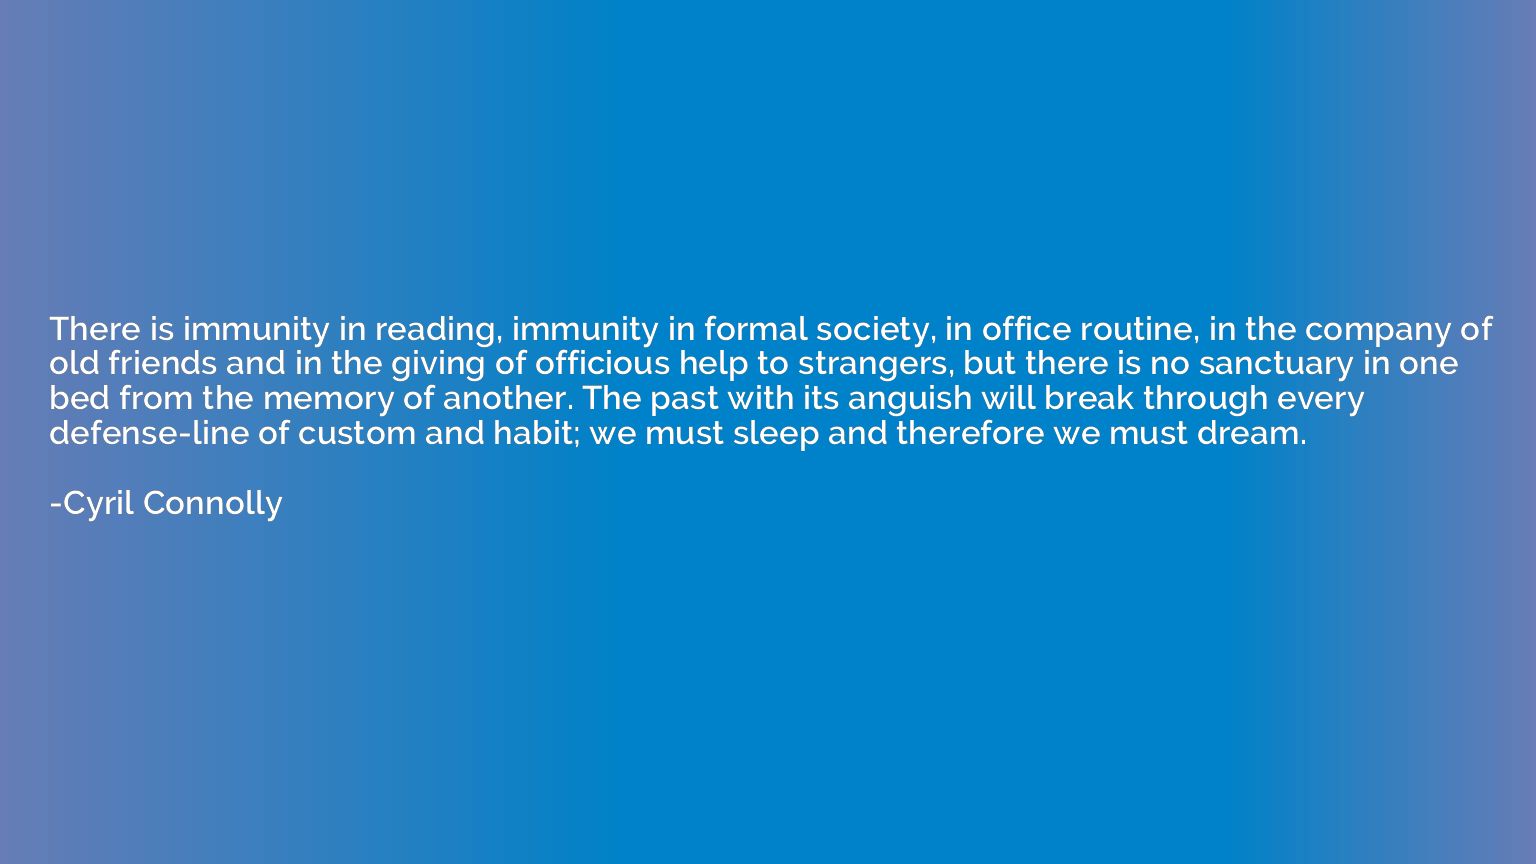 There is immunity in reading, immunity in formal society, in